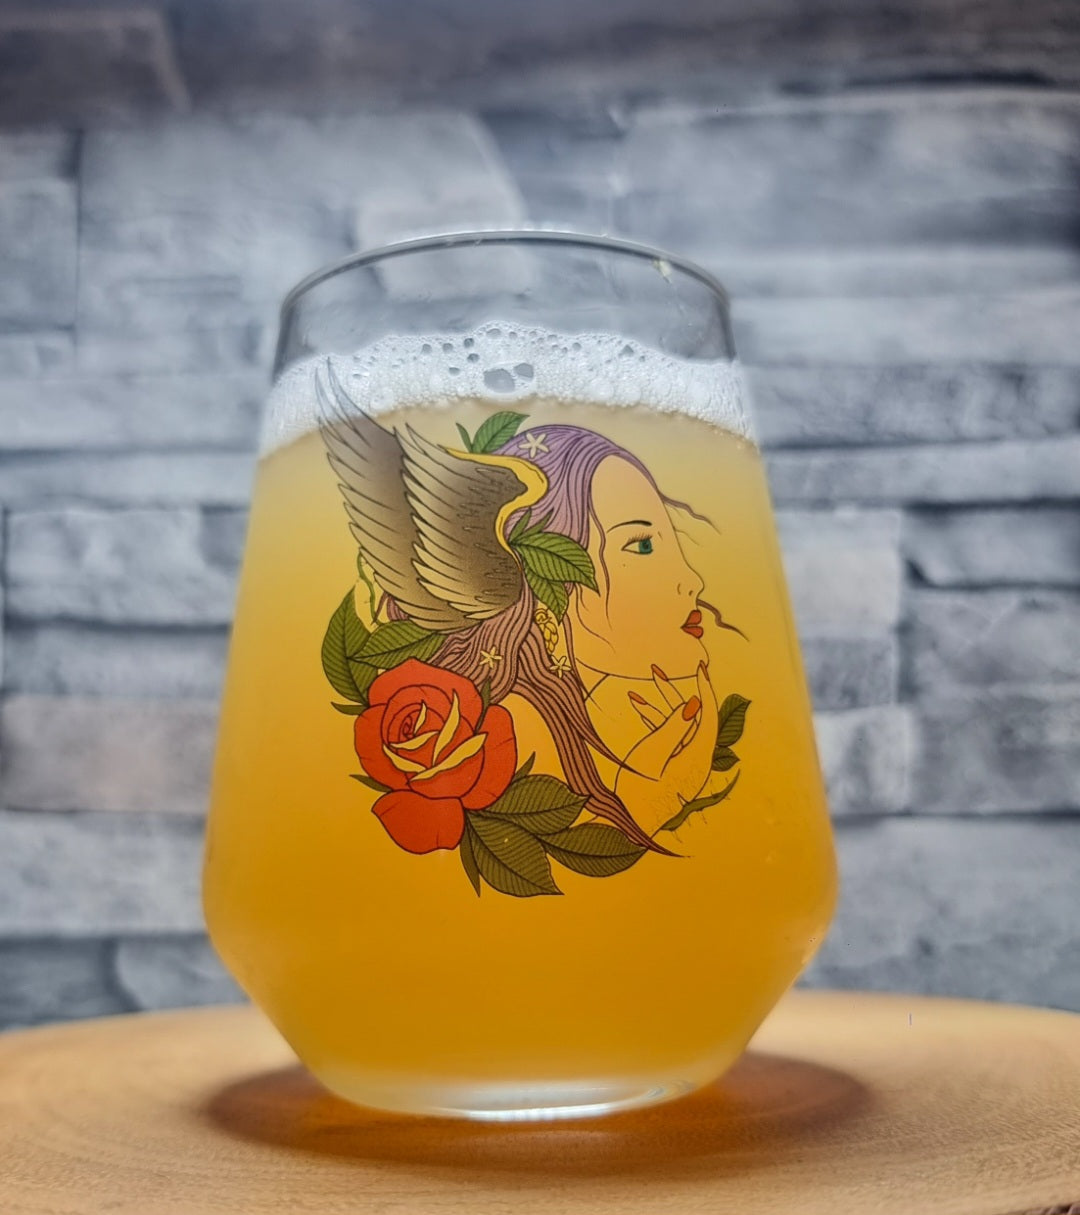 Allegra Glass with Gypsy Girl Print - Premium Quality Glassware for Elegant Occasions